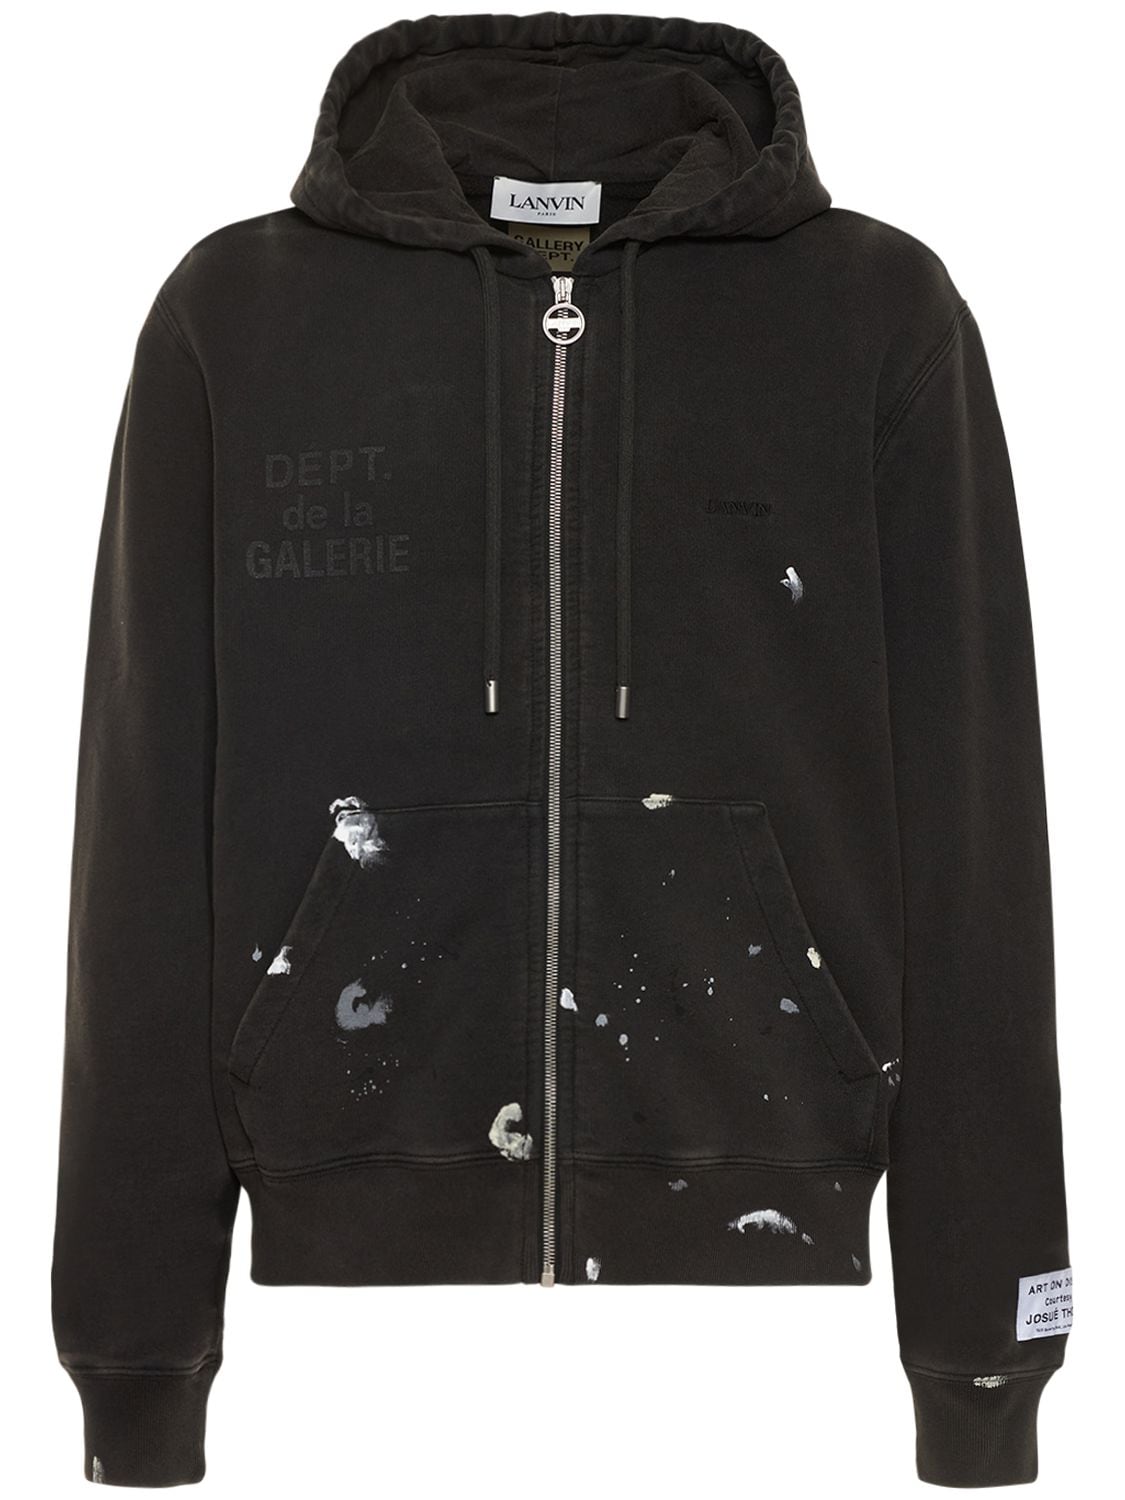 GALLERY DEPT X LANVIN Logo Hand Painted Washed Hoodie